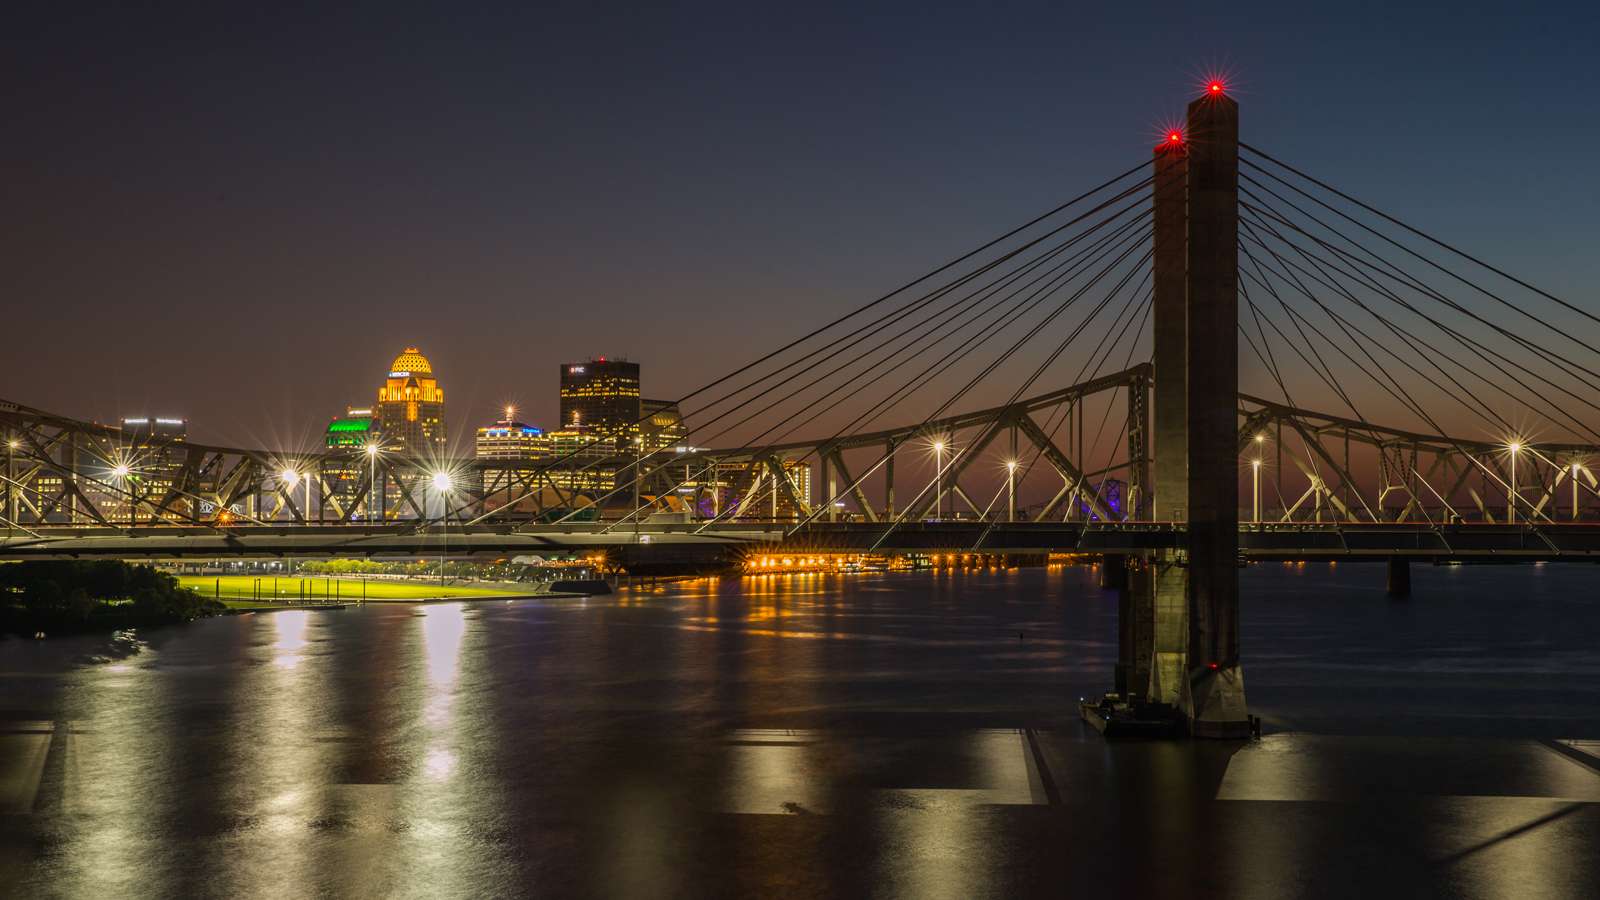 Showing the bridge downtown Louisville at night